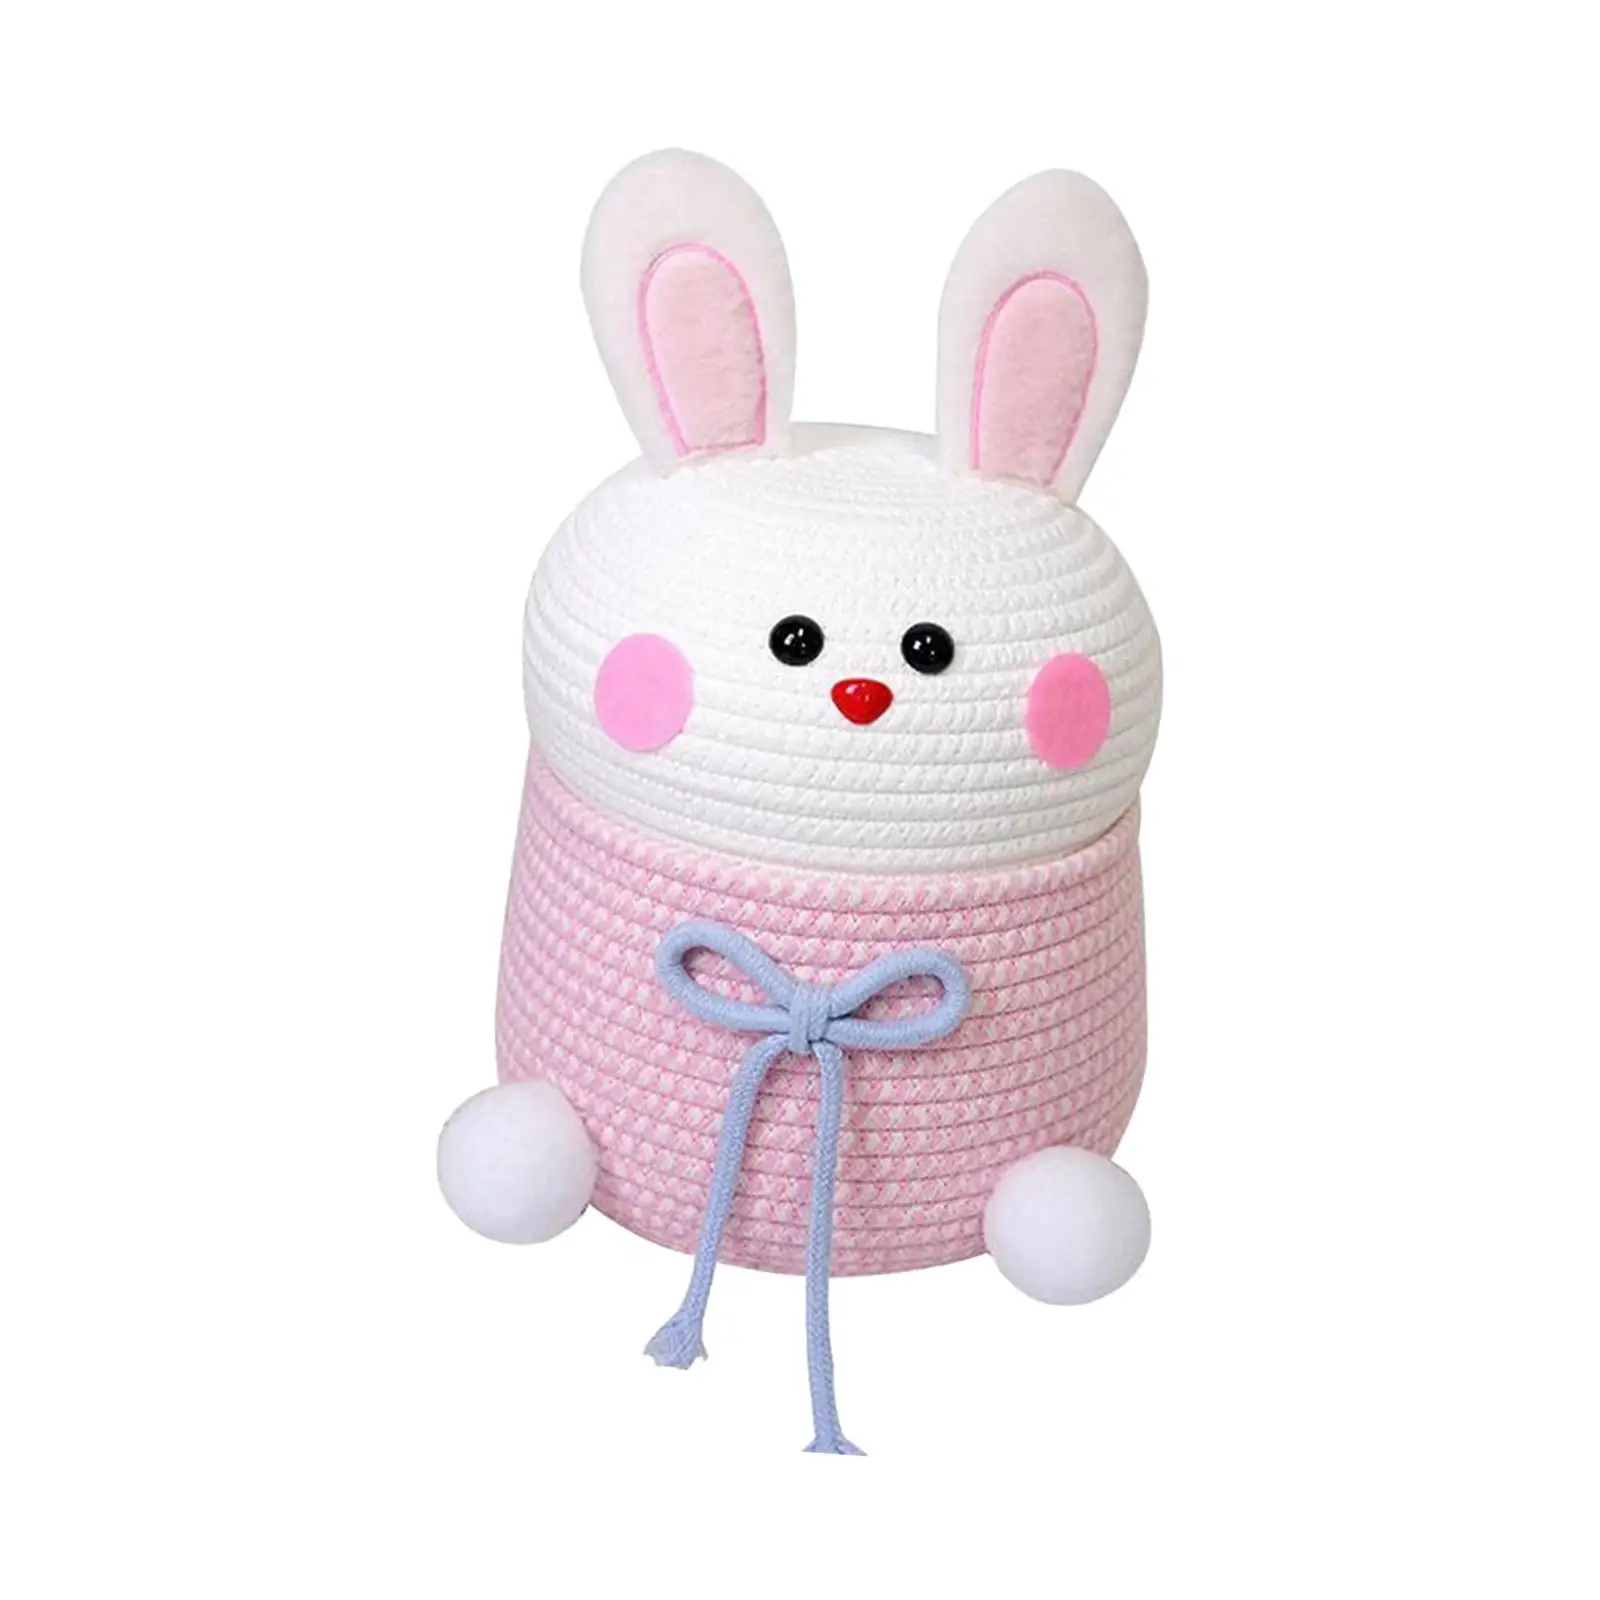 Rabbit Woven Basket Tabletop Nordic Sturdy Large Capacity Living Room Soft Makeup Cosmetic Holder Storage Bins Toys Shoes Books